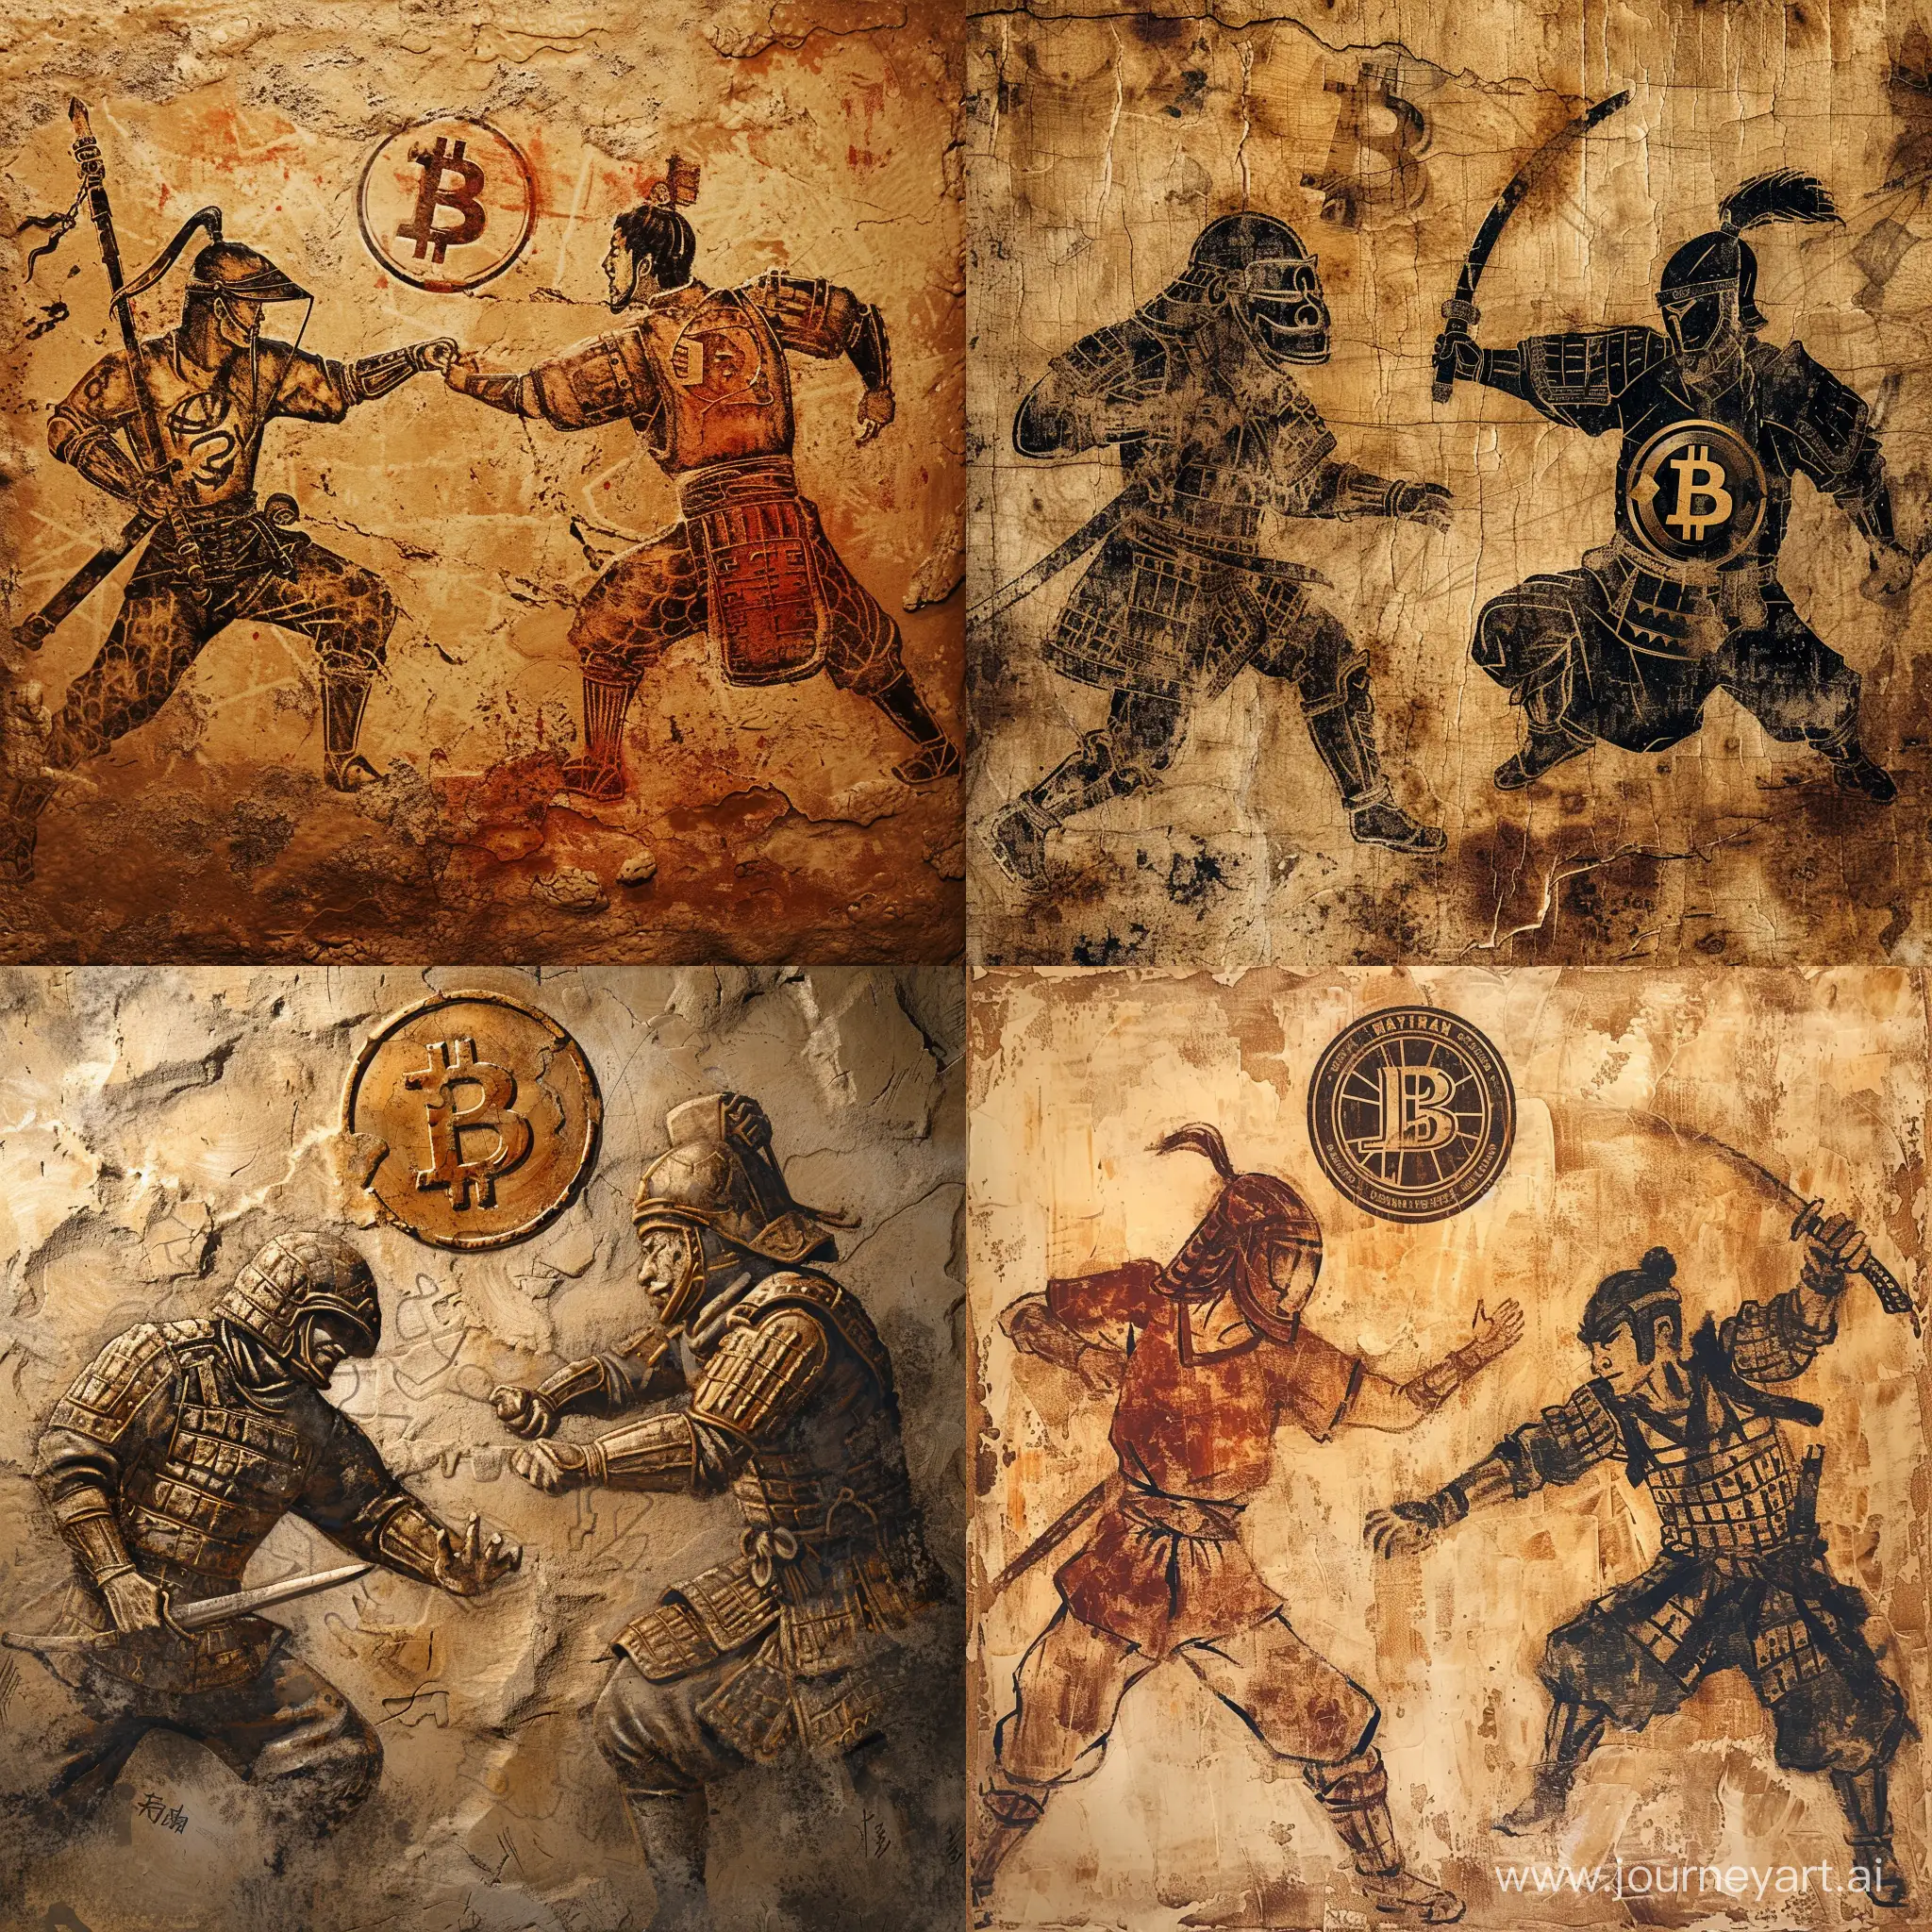 Faded art, painting. Prehistoric cave art of a strong and lean medieval Chinese soldier with visor helmet and embossed with the aleph (ℵ) symbol battling a medieval lean and strong Japanese warrior embossed with the Bitcoin logo.